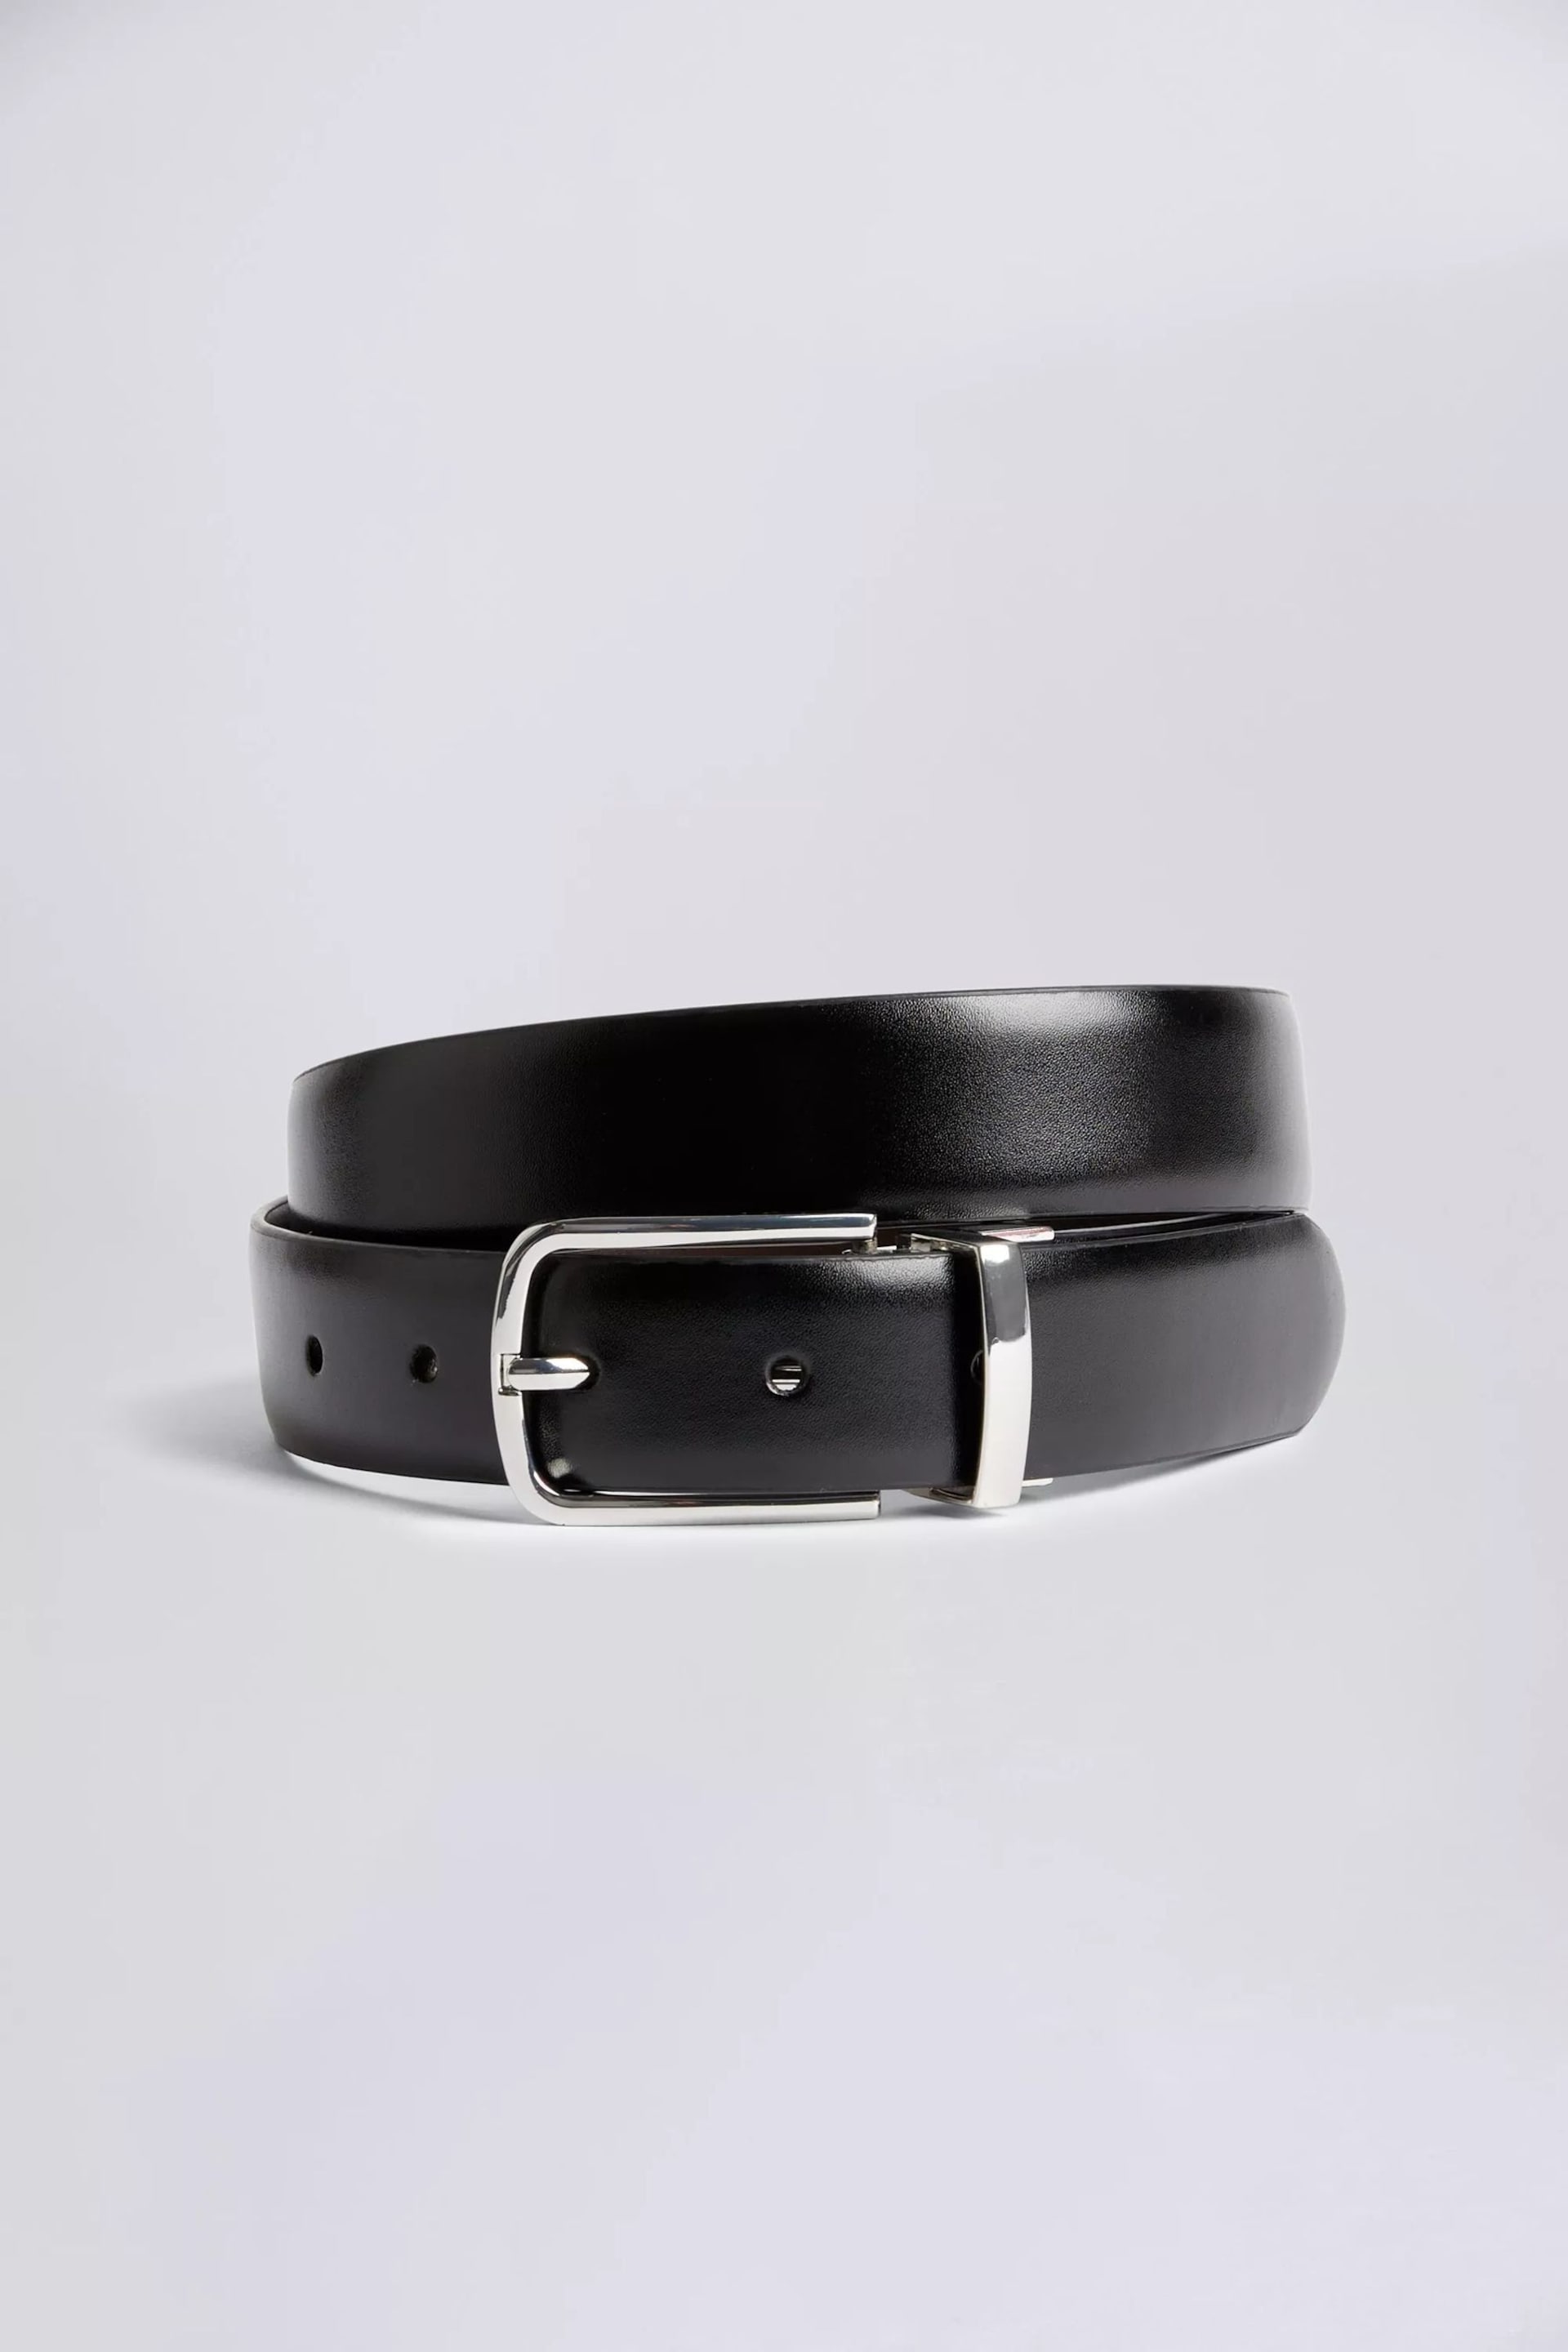 MOSS Black and Brown Reversible Belt - Image 1 of 2